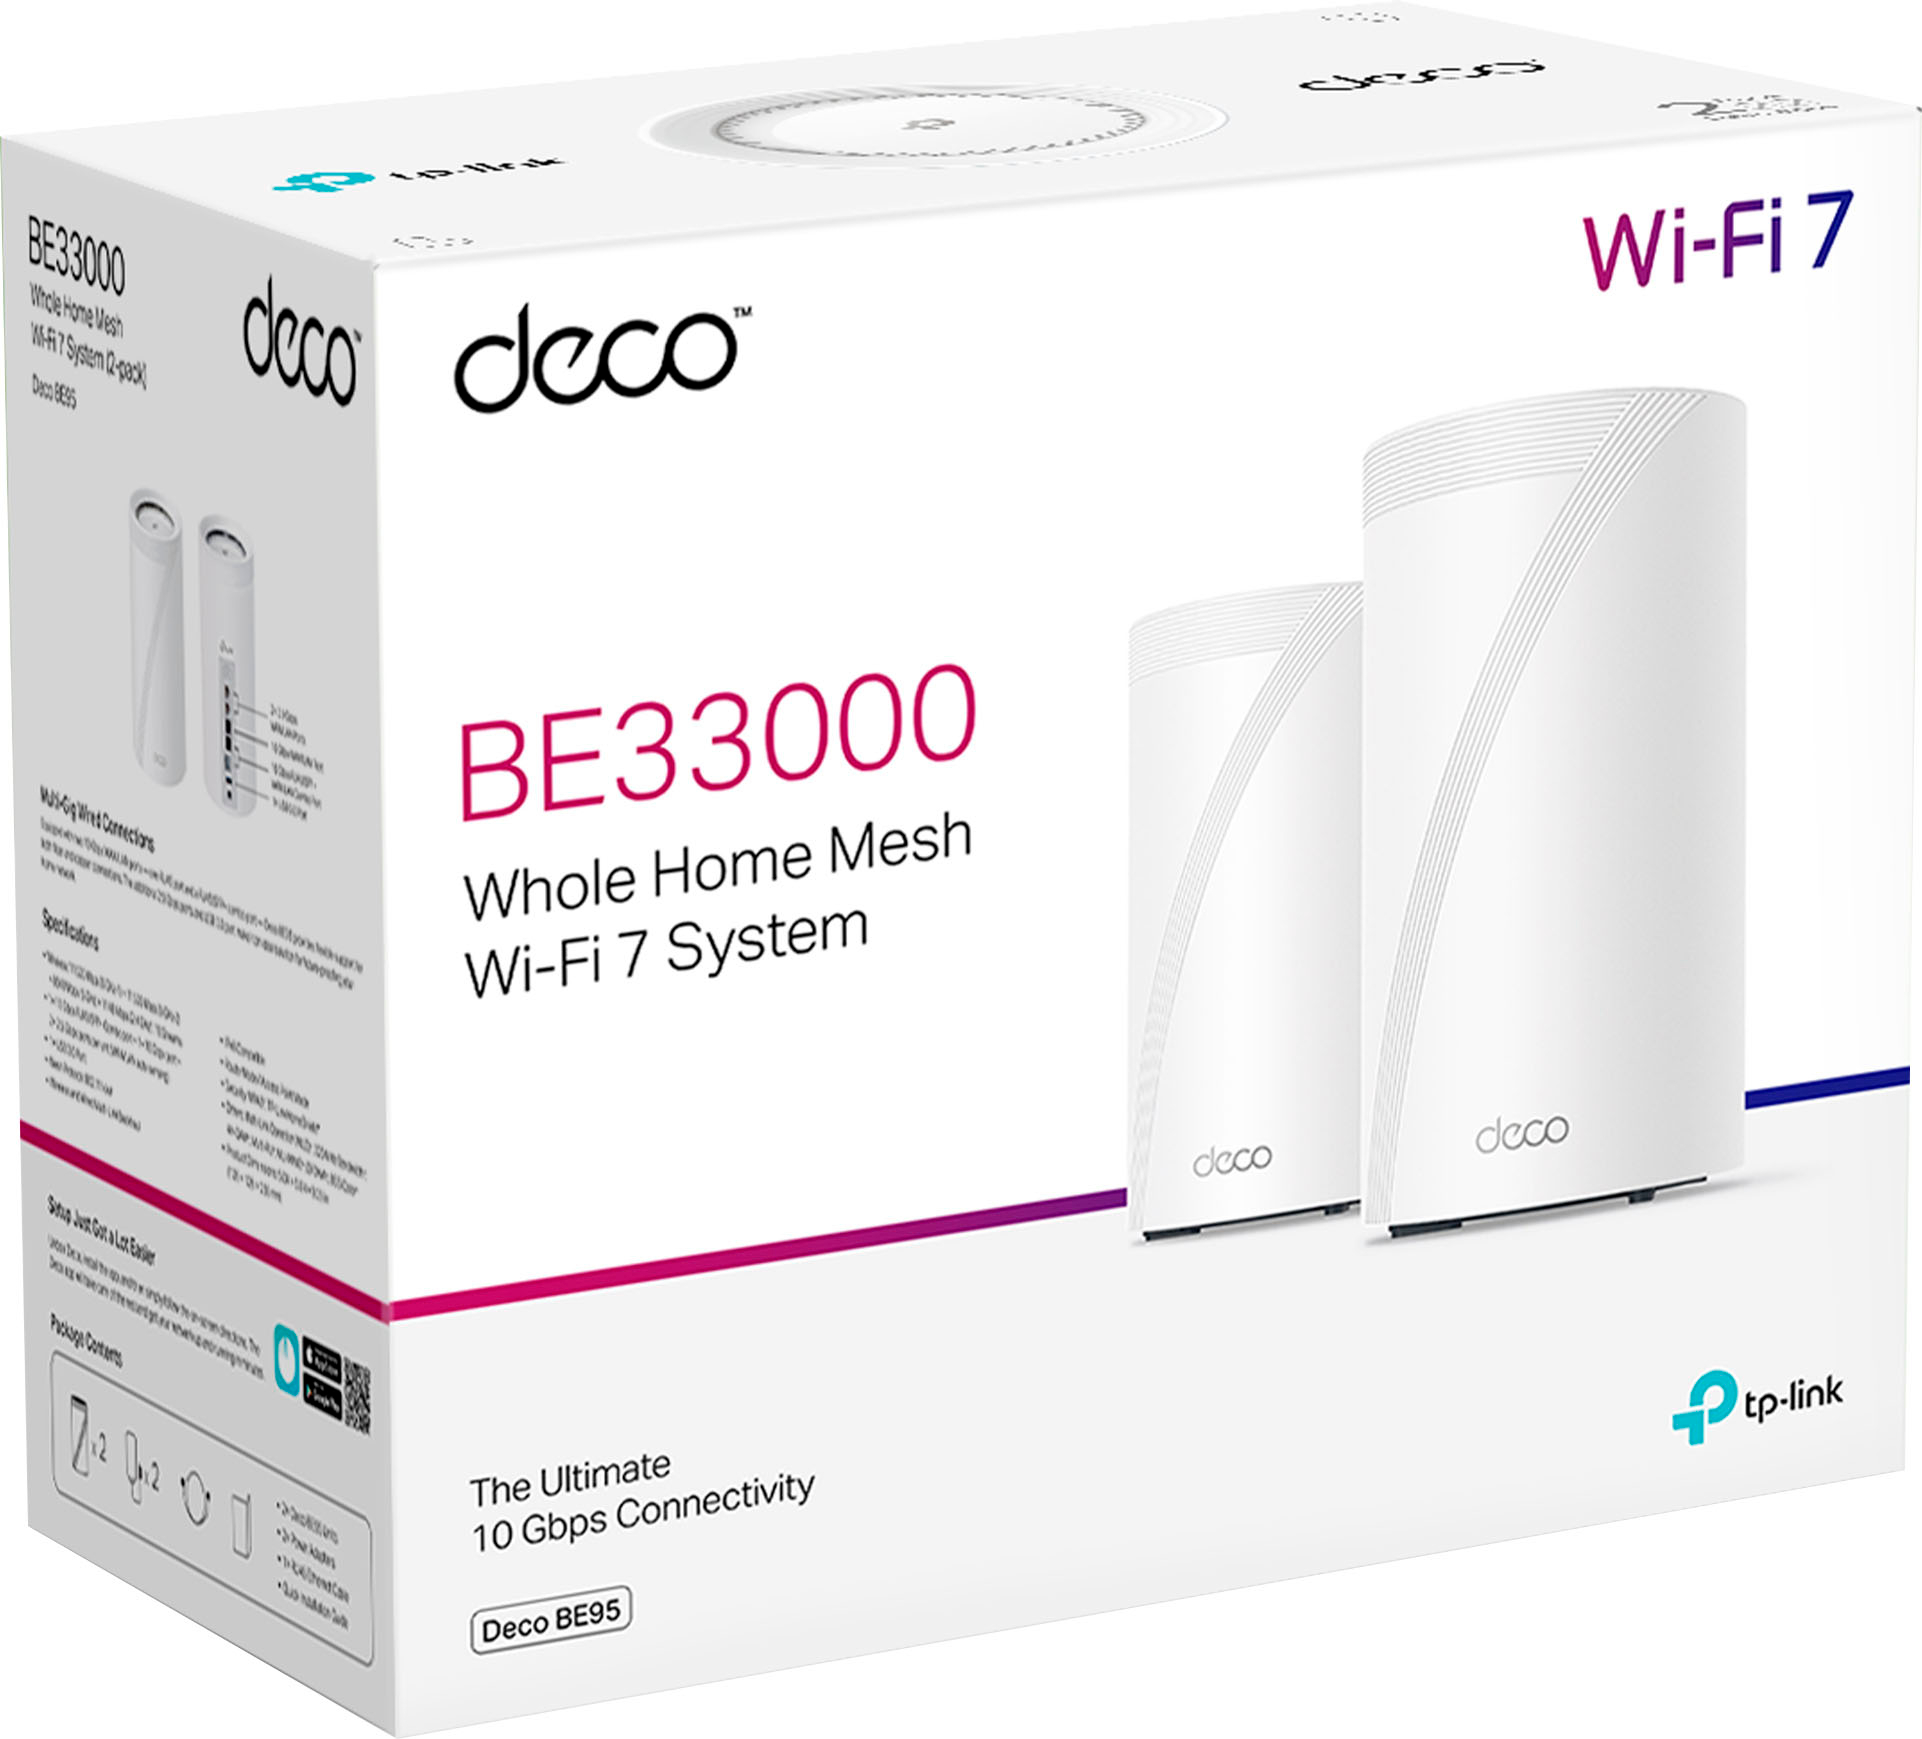  TP-Link Deco BE33000 Quad-Band WiFi 7 Mesh System (Deco BE95)  for Whole Home Coverage up to 7800 Sq.Ft with AI-Driven Smart Antennas, 10G  Multi-Gig Ethernet ports, Replaces Router and Extender(2-pack) 